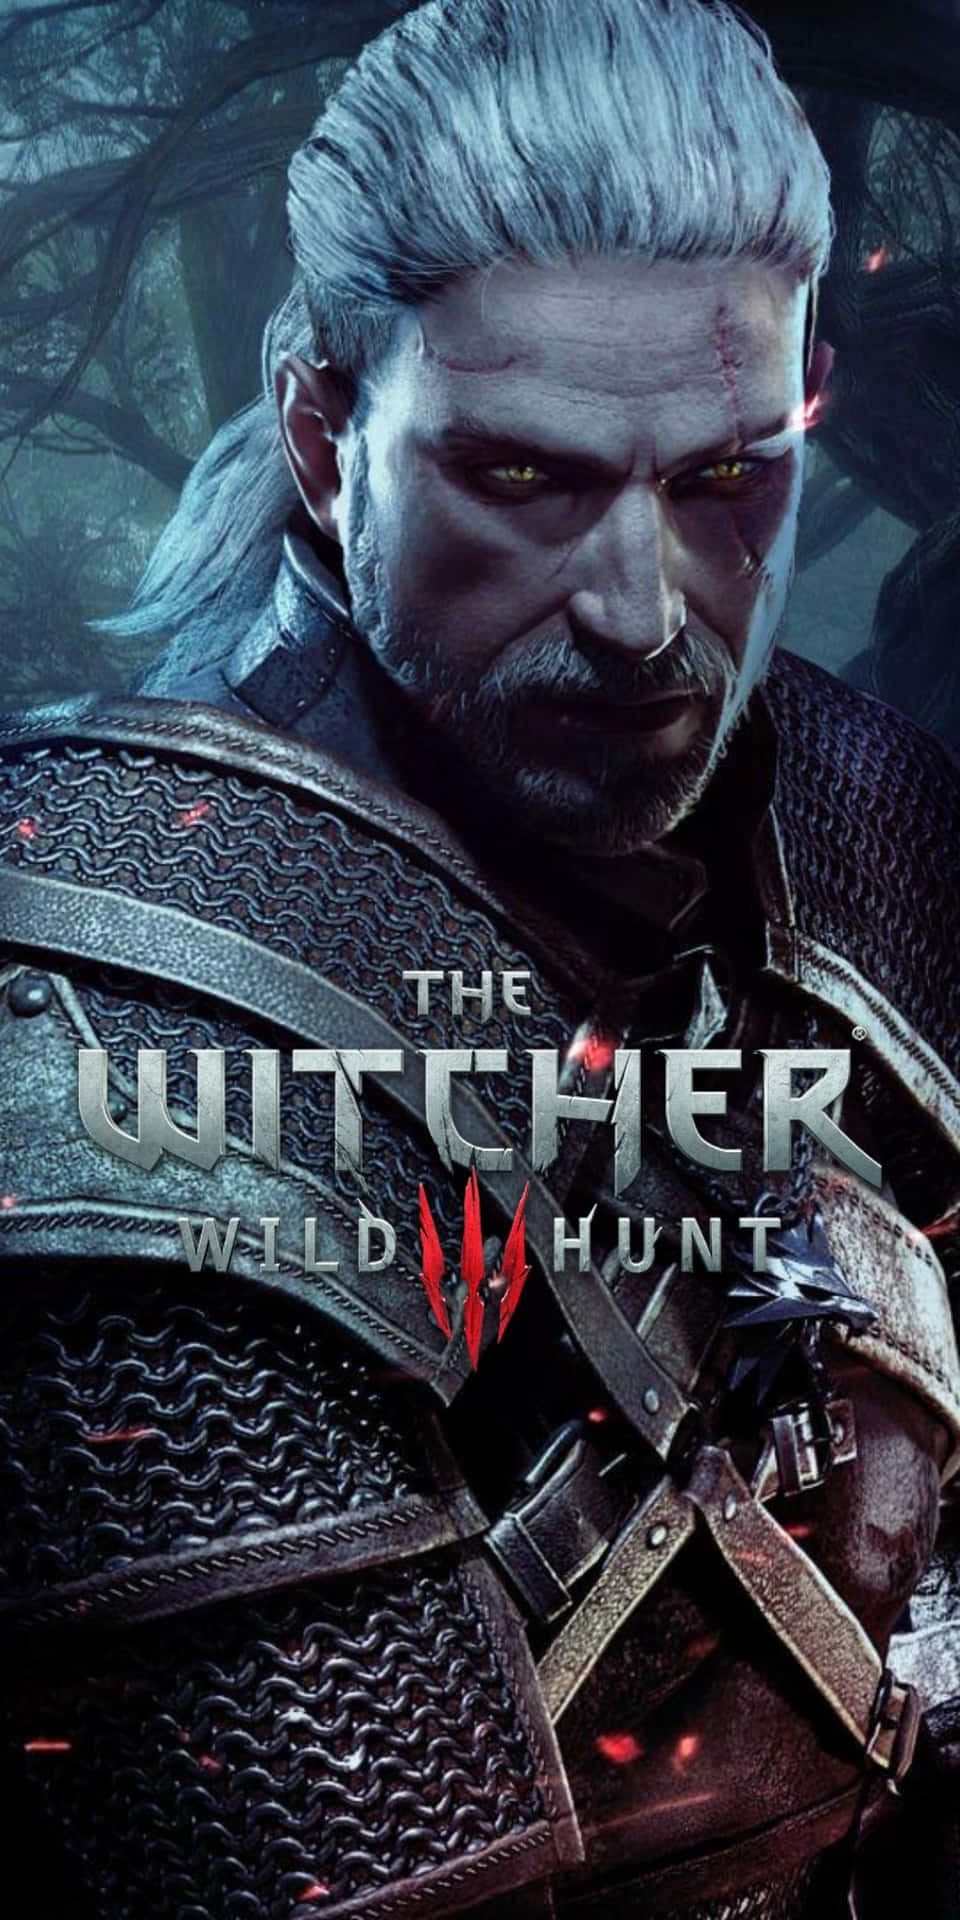 Step into a world of fantasy with The Witcher 3 on Pixel 3